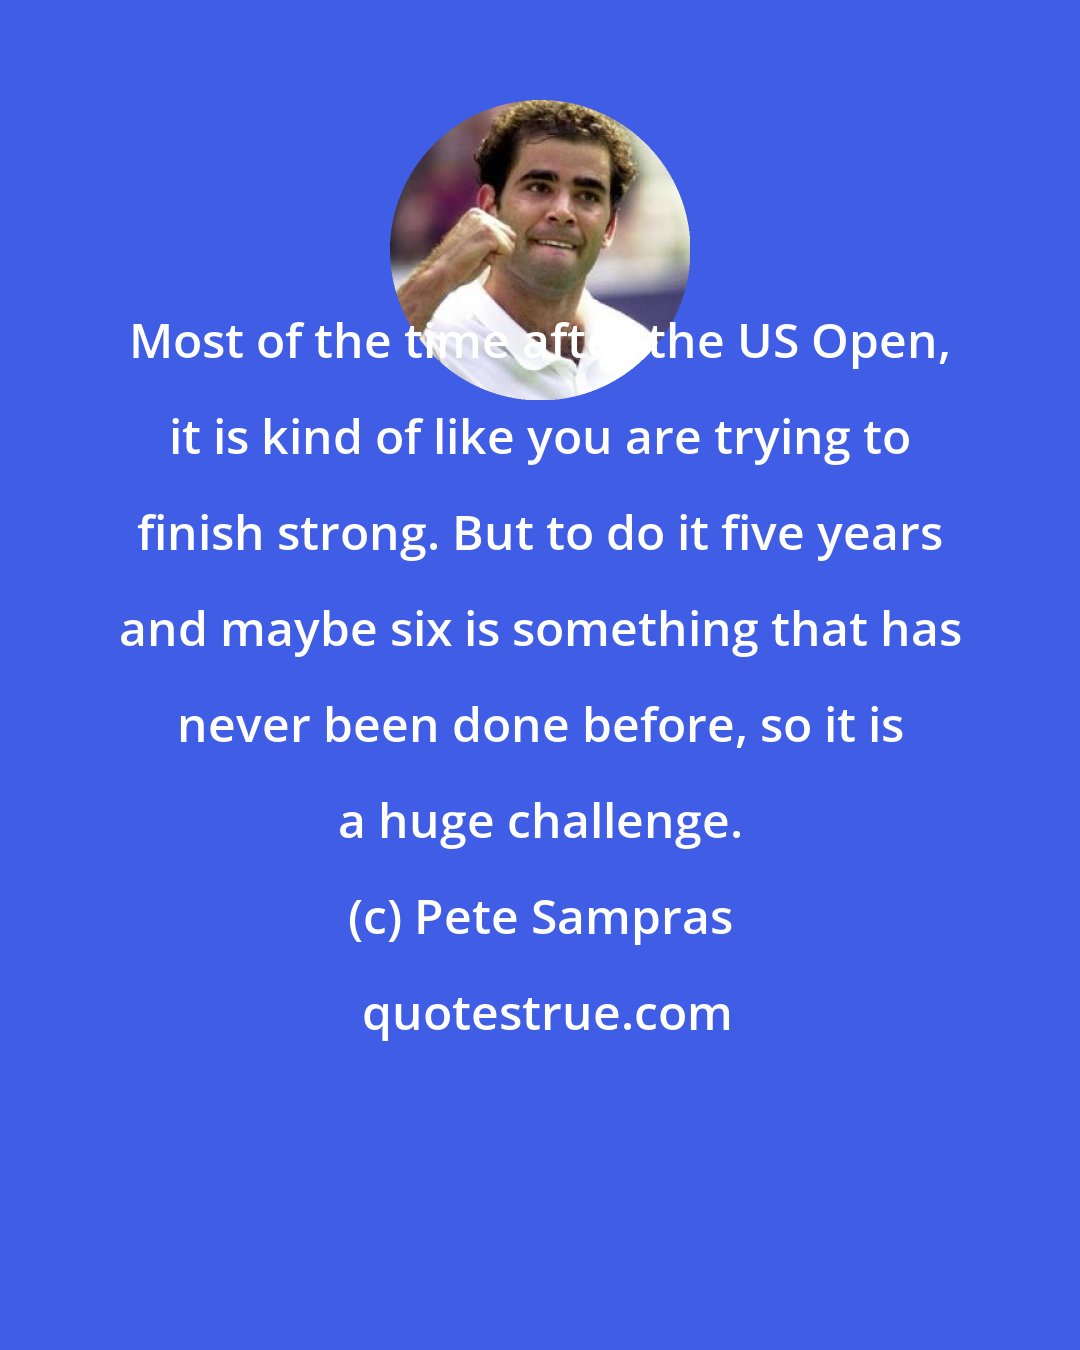 Pete Sampras: Most of the time after the US Open, it is kind of like you are trying to finish strong. But to do it five years and maybe six is something that has never been done before, so it is a huge challenge.